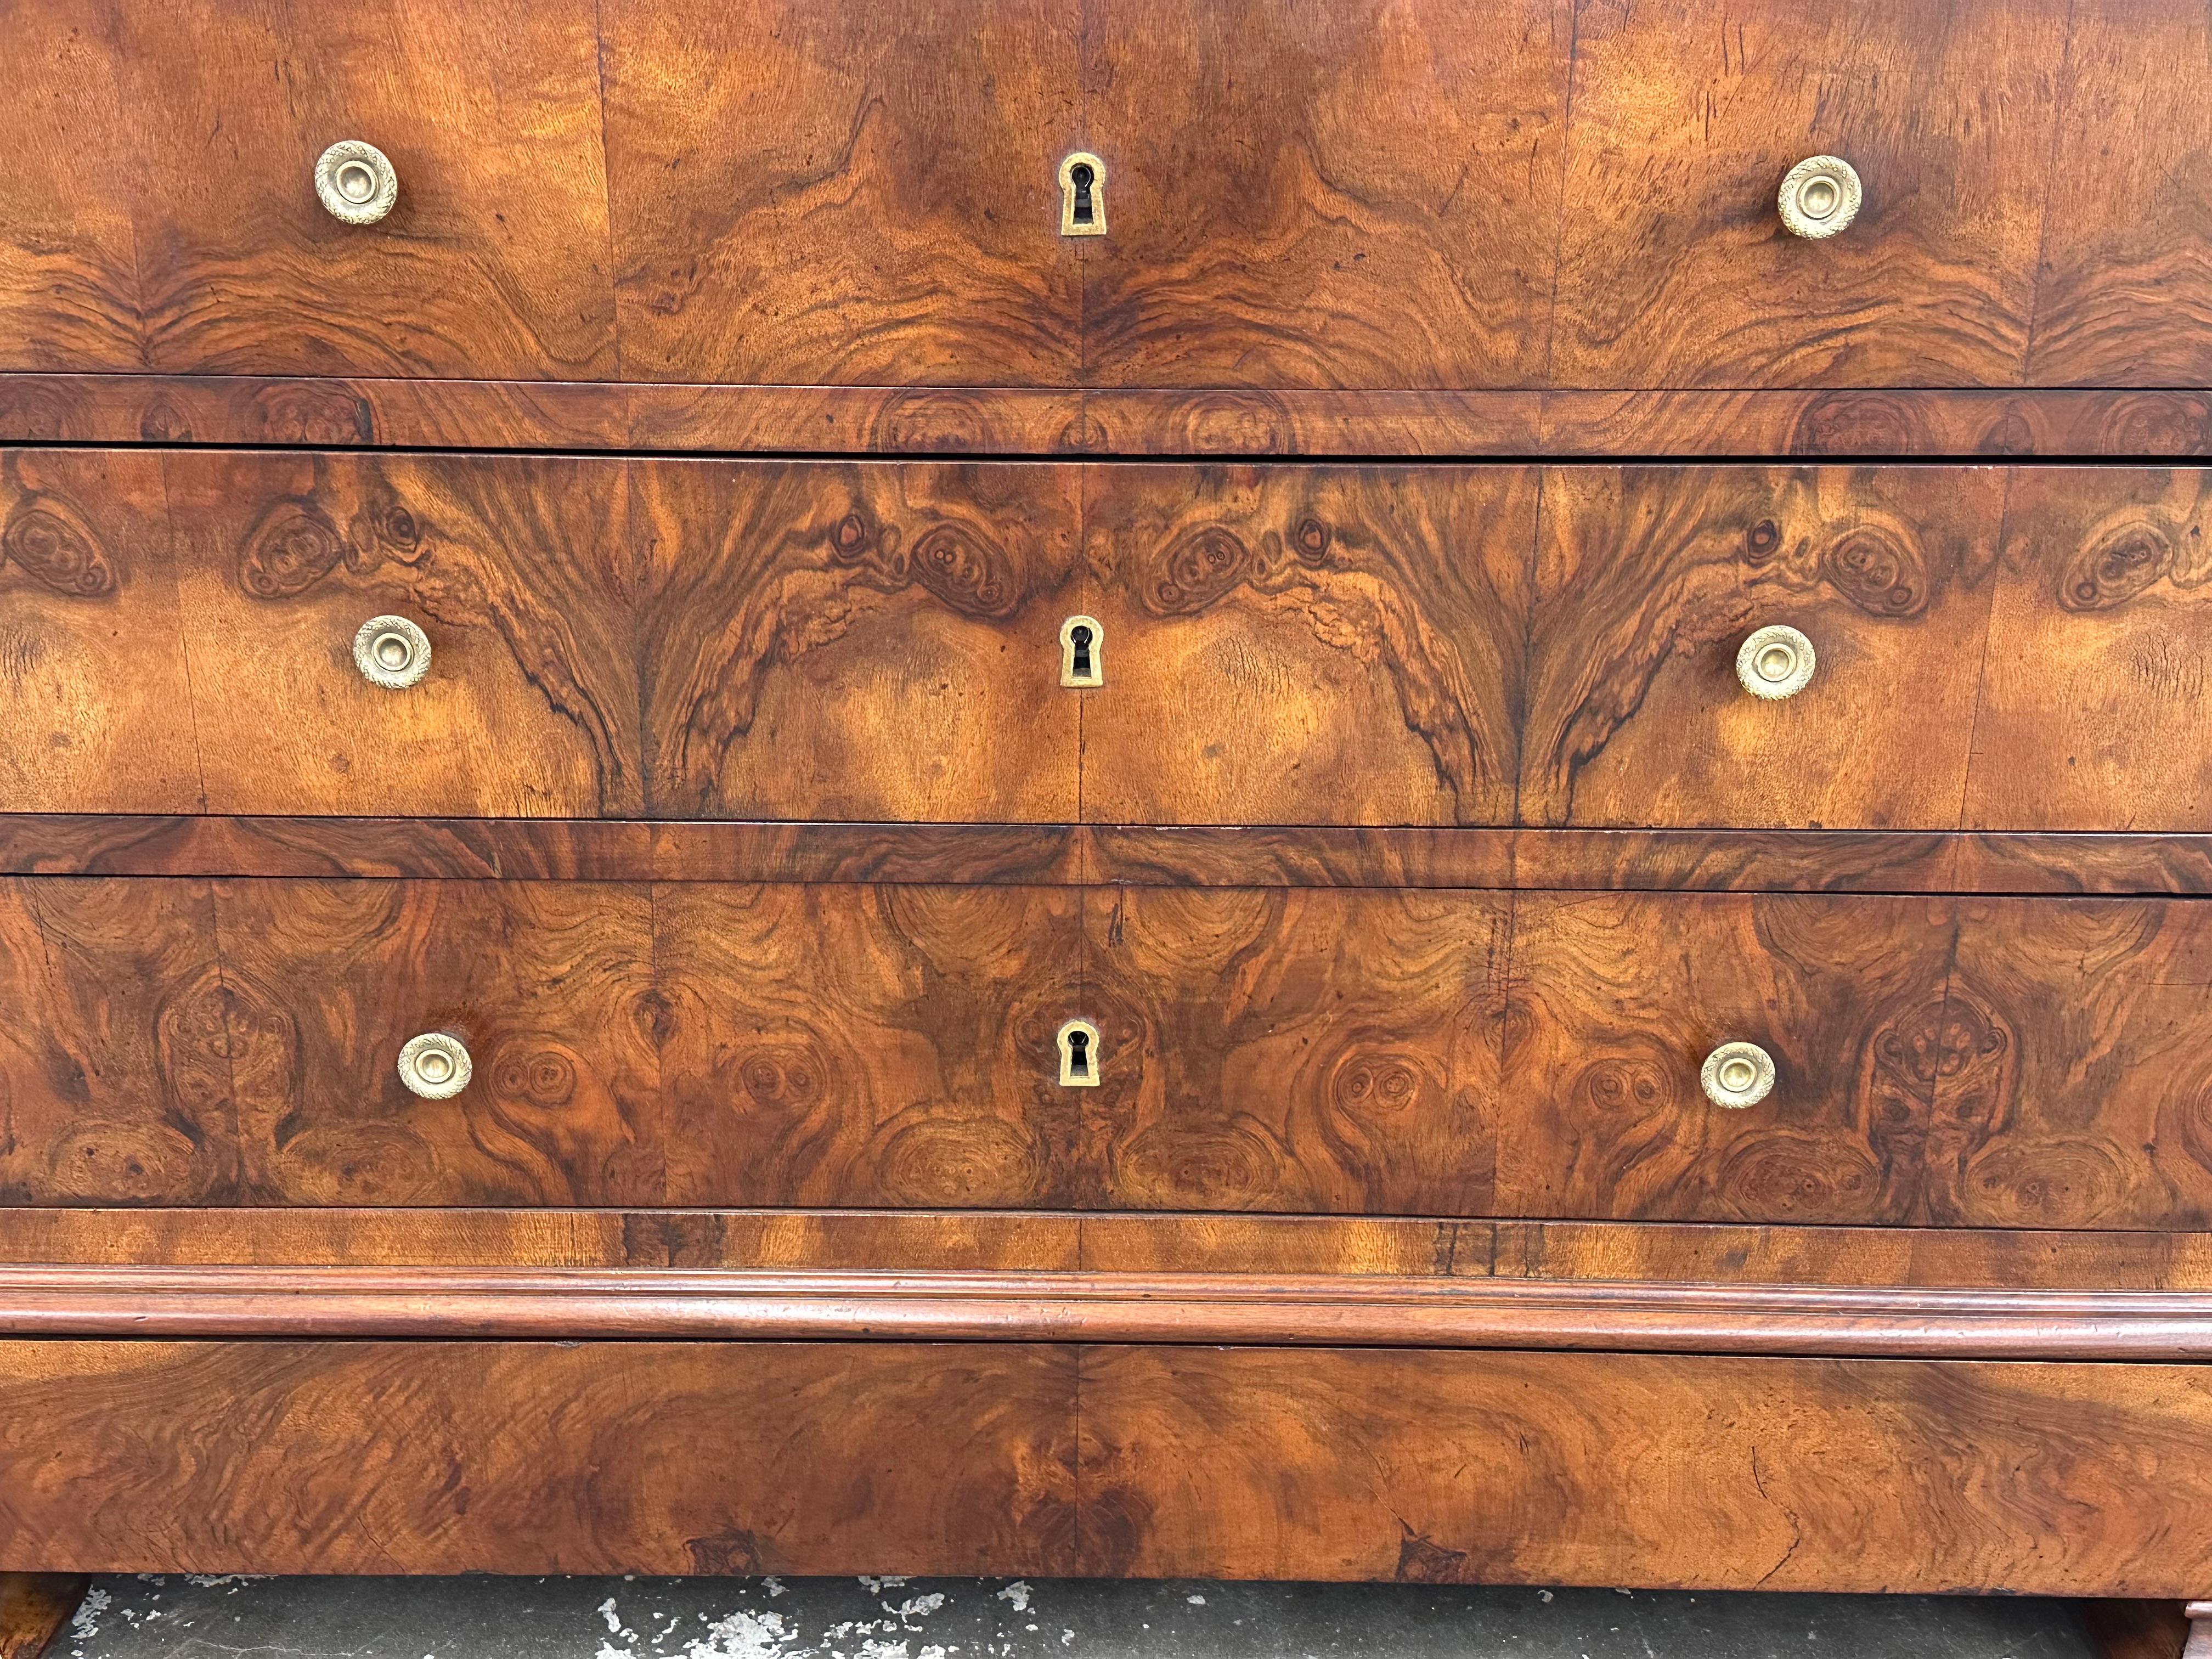 This is a beautiful 19th century Louis Philip chest of drawers! The burled wood has exquisite design and is such a feast for the eye! Simple brass knobs and keyholes add the perfect accent, and the gorgeous black and grey swirled marble slab on top